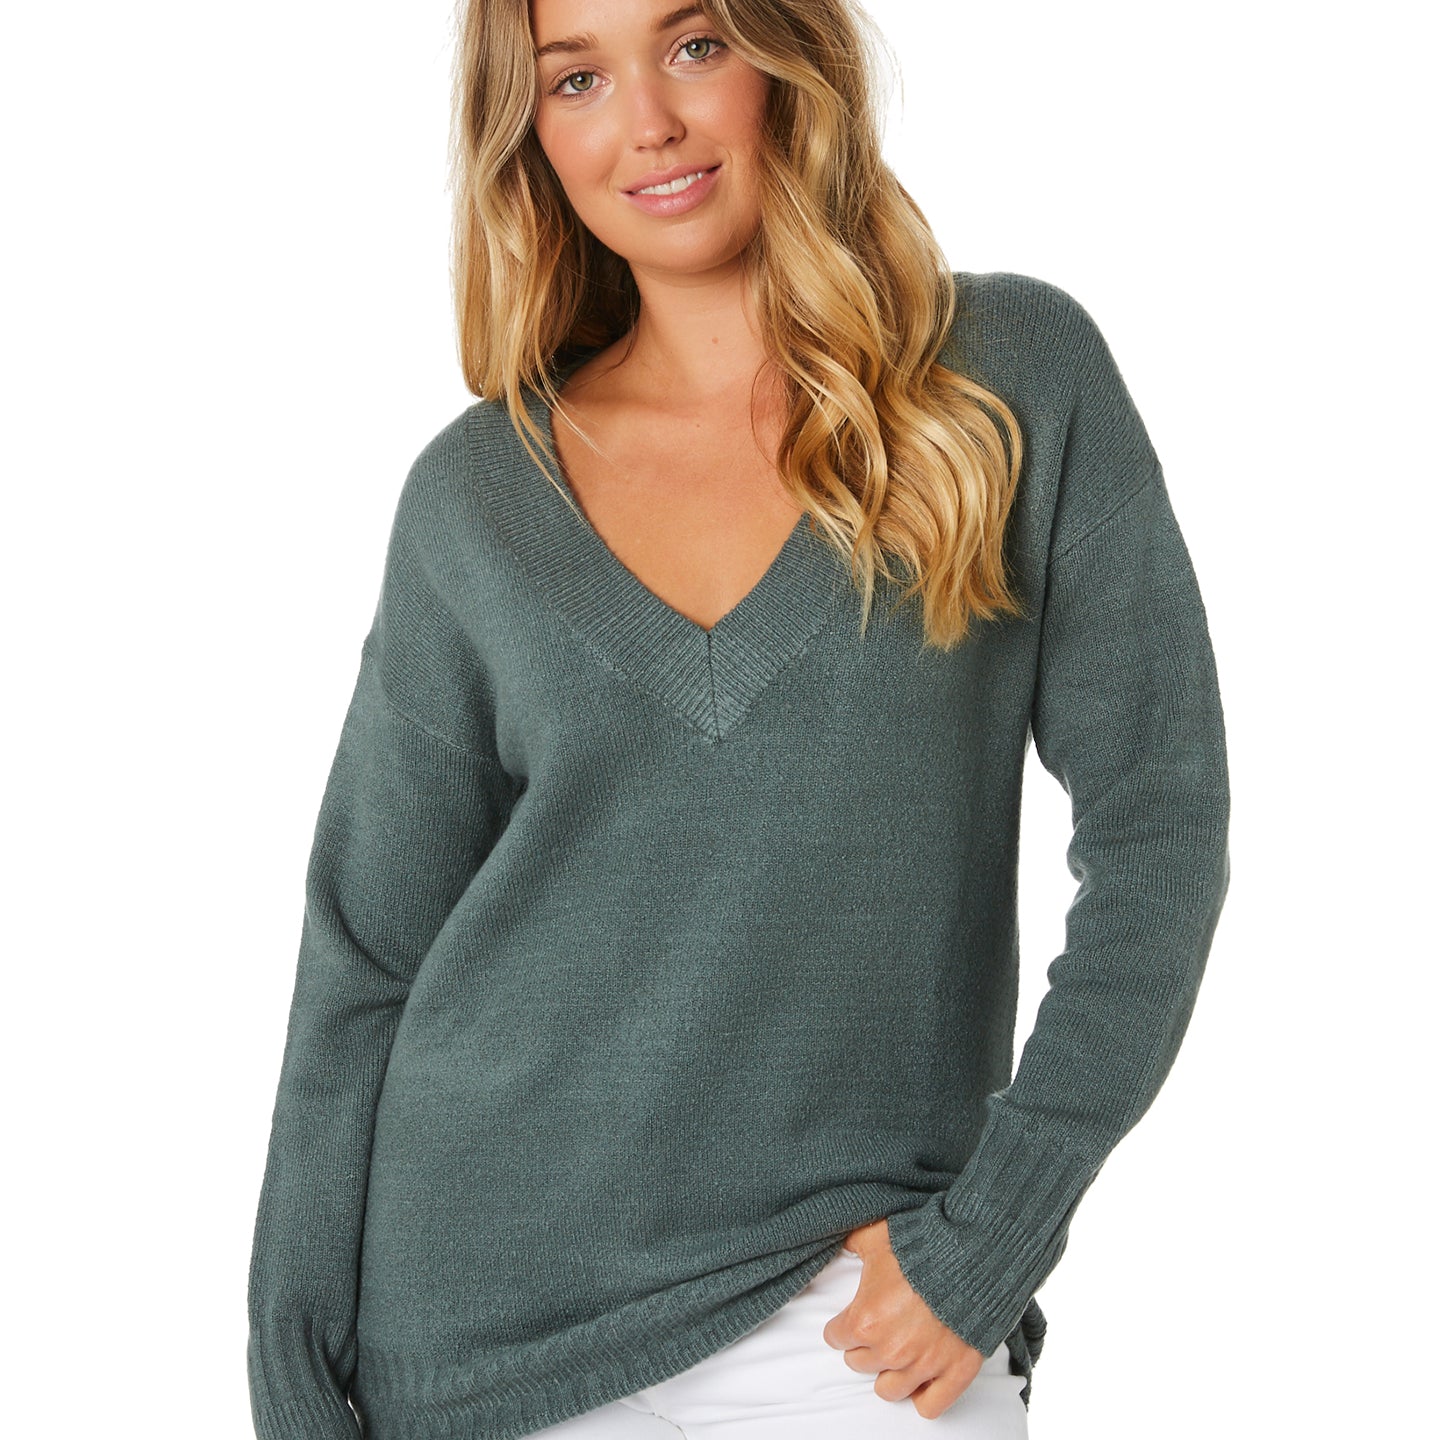 Rusty Together Vee Nick Knit Sweater EVG-Evergreen XS